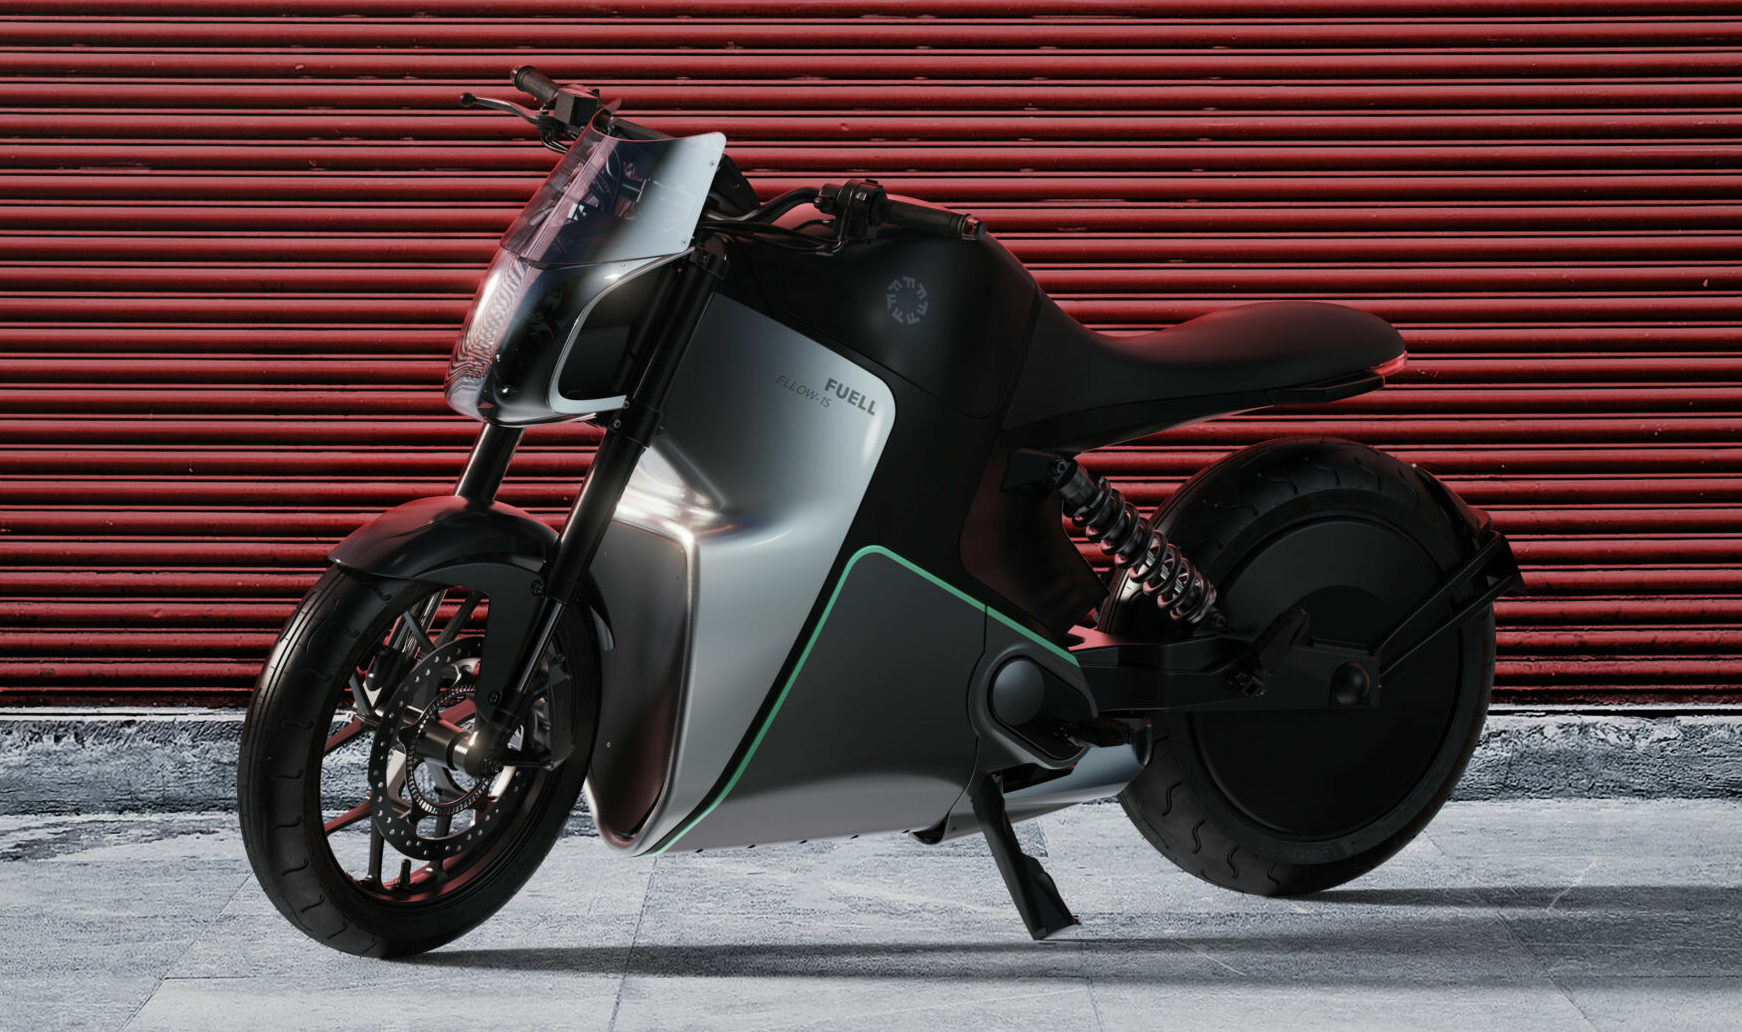 A FUELL Fllow electric motorcycle. Photo courtesy FUELL.